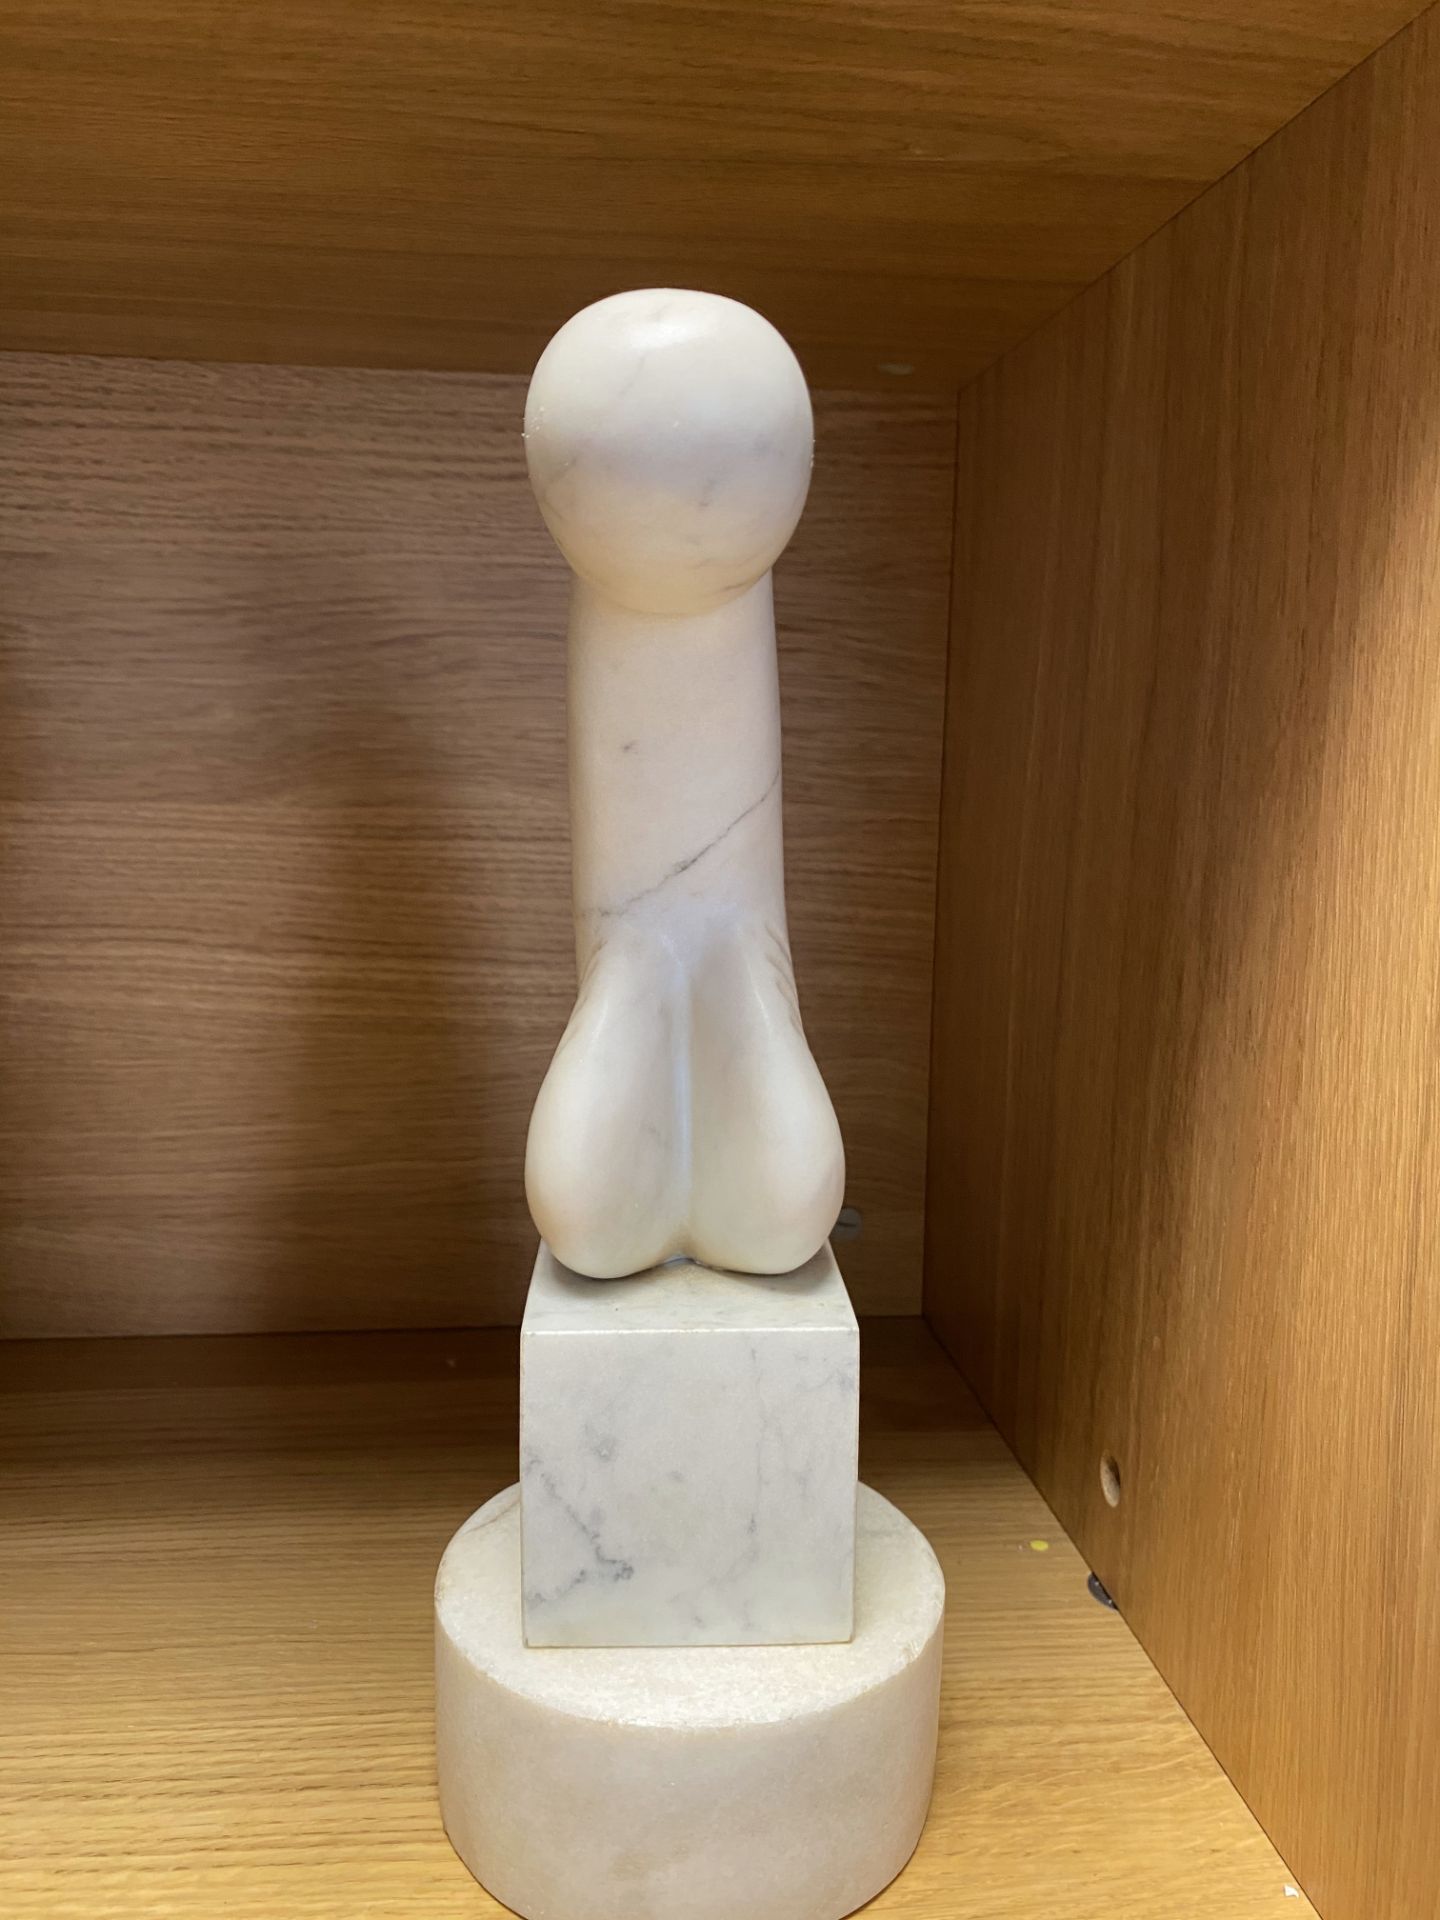 Constantin Brancusi (1876-1957) Marble Art Sculpture Signed and Dated 1943